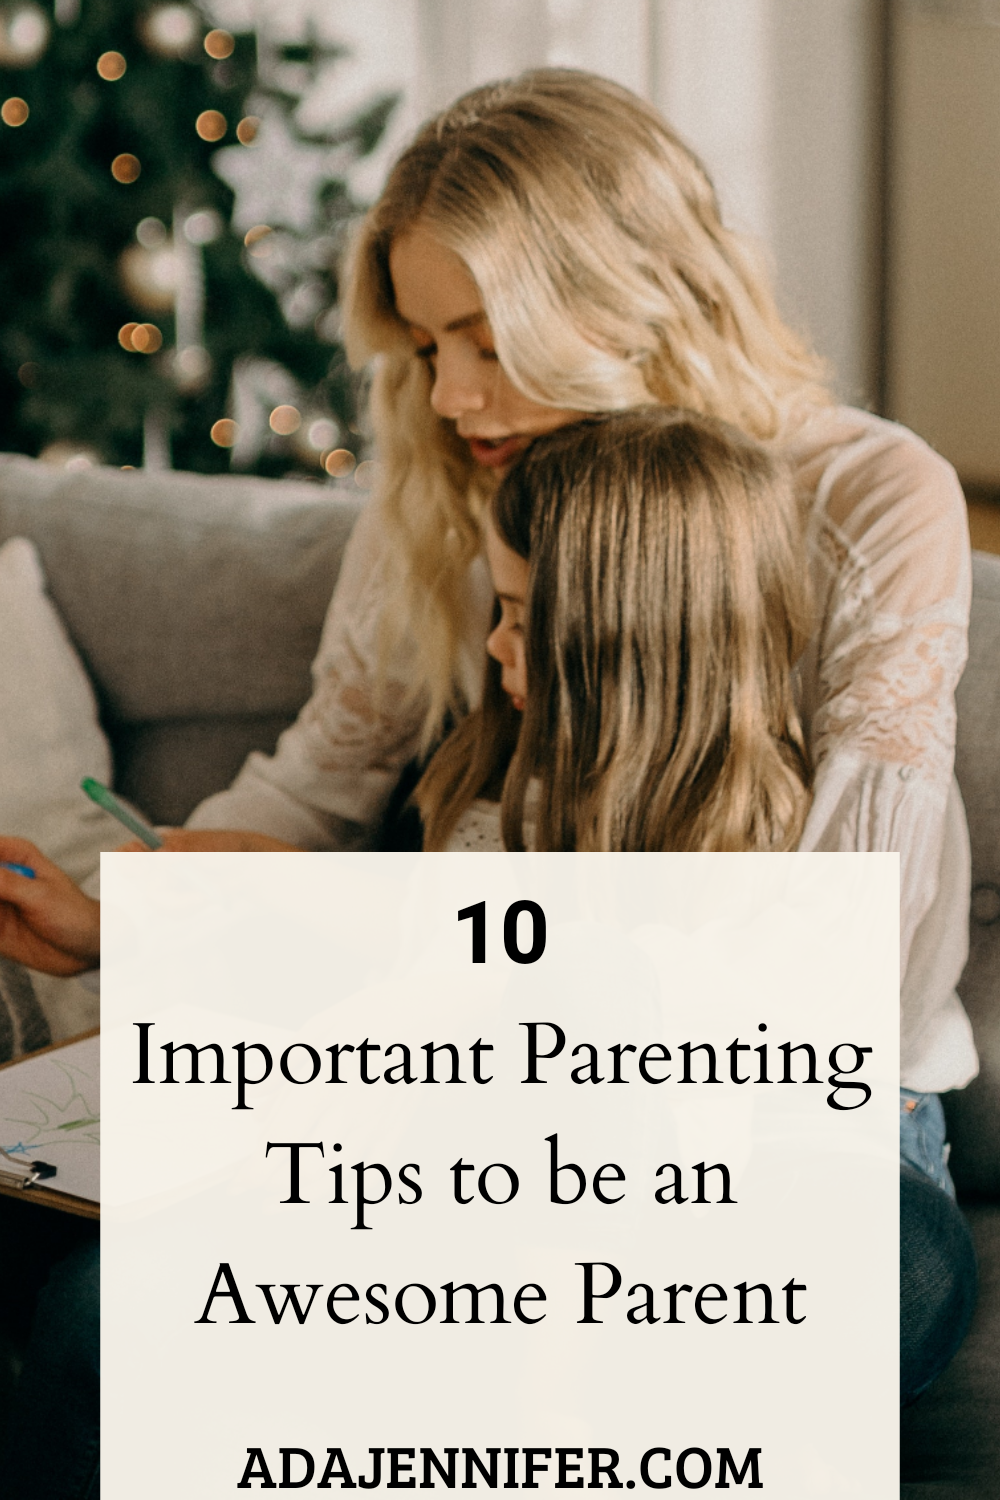 Parenting tips for toddlers